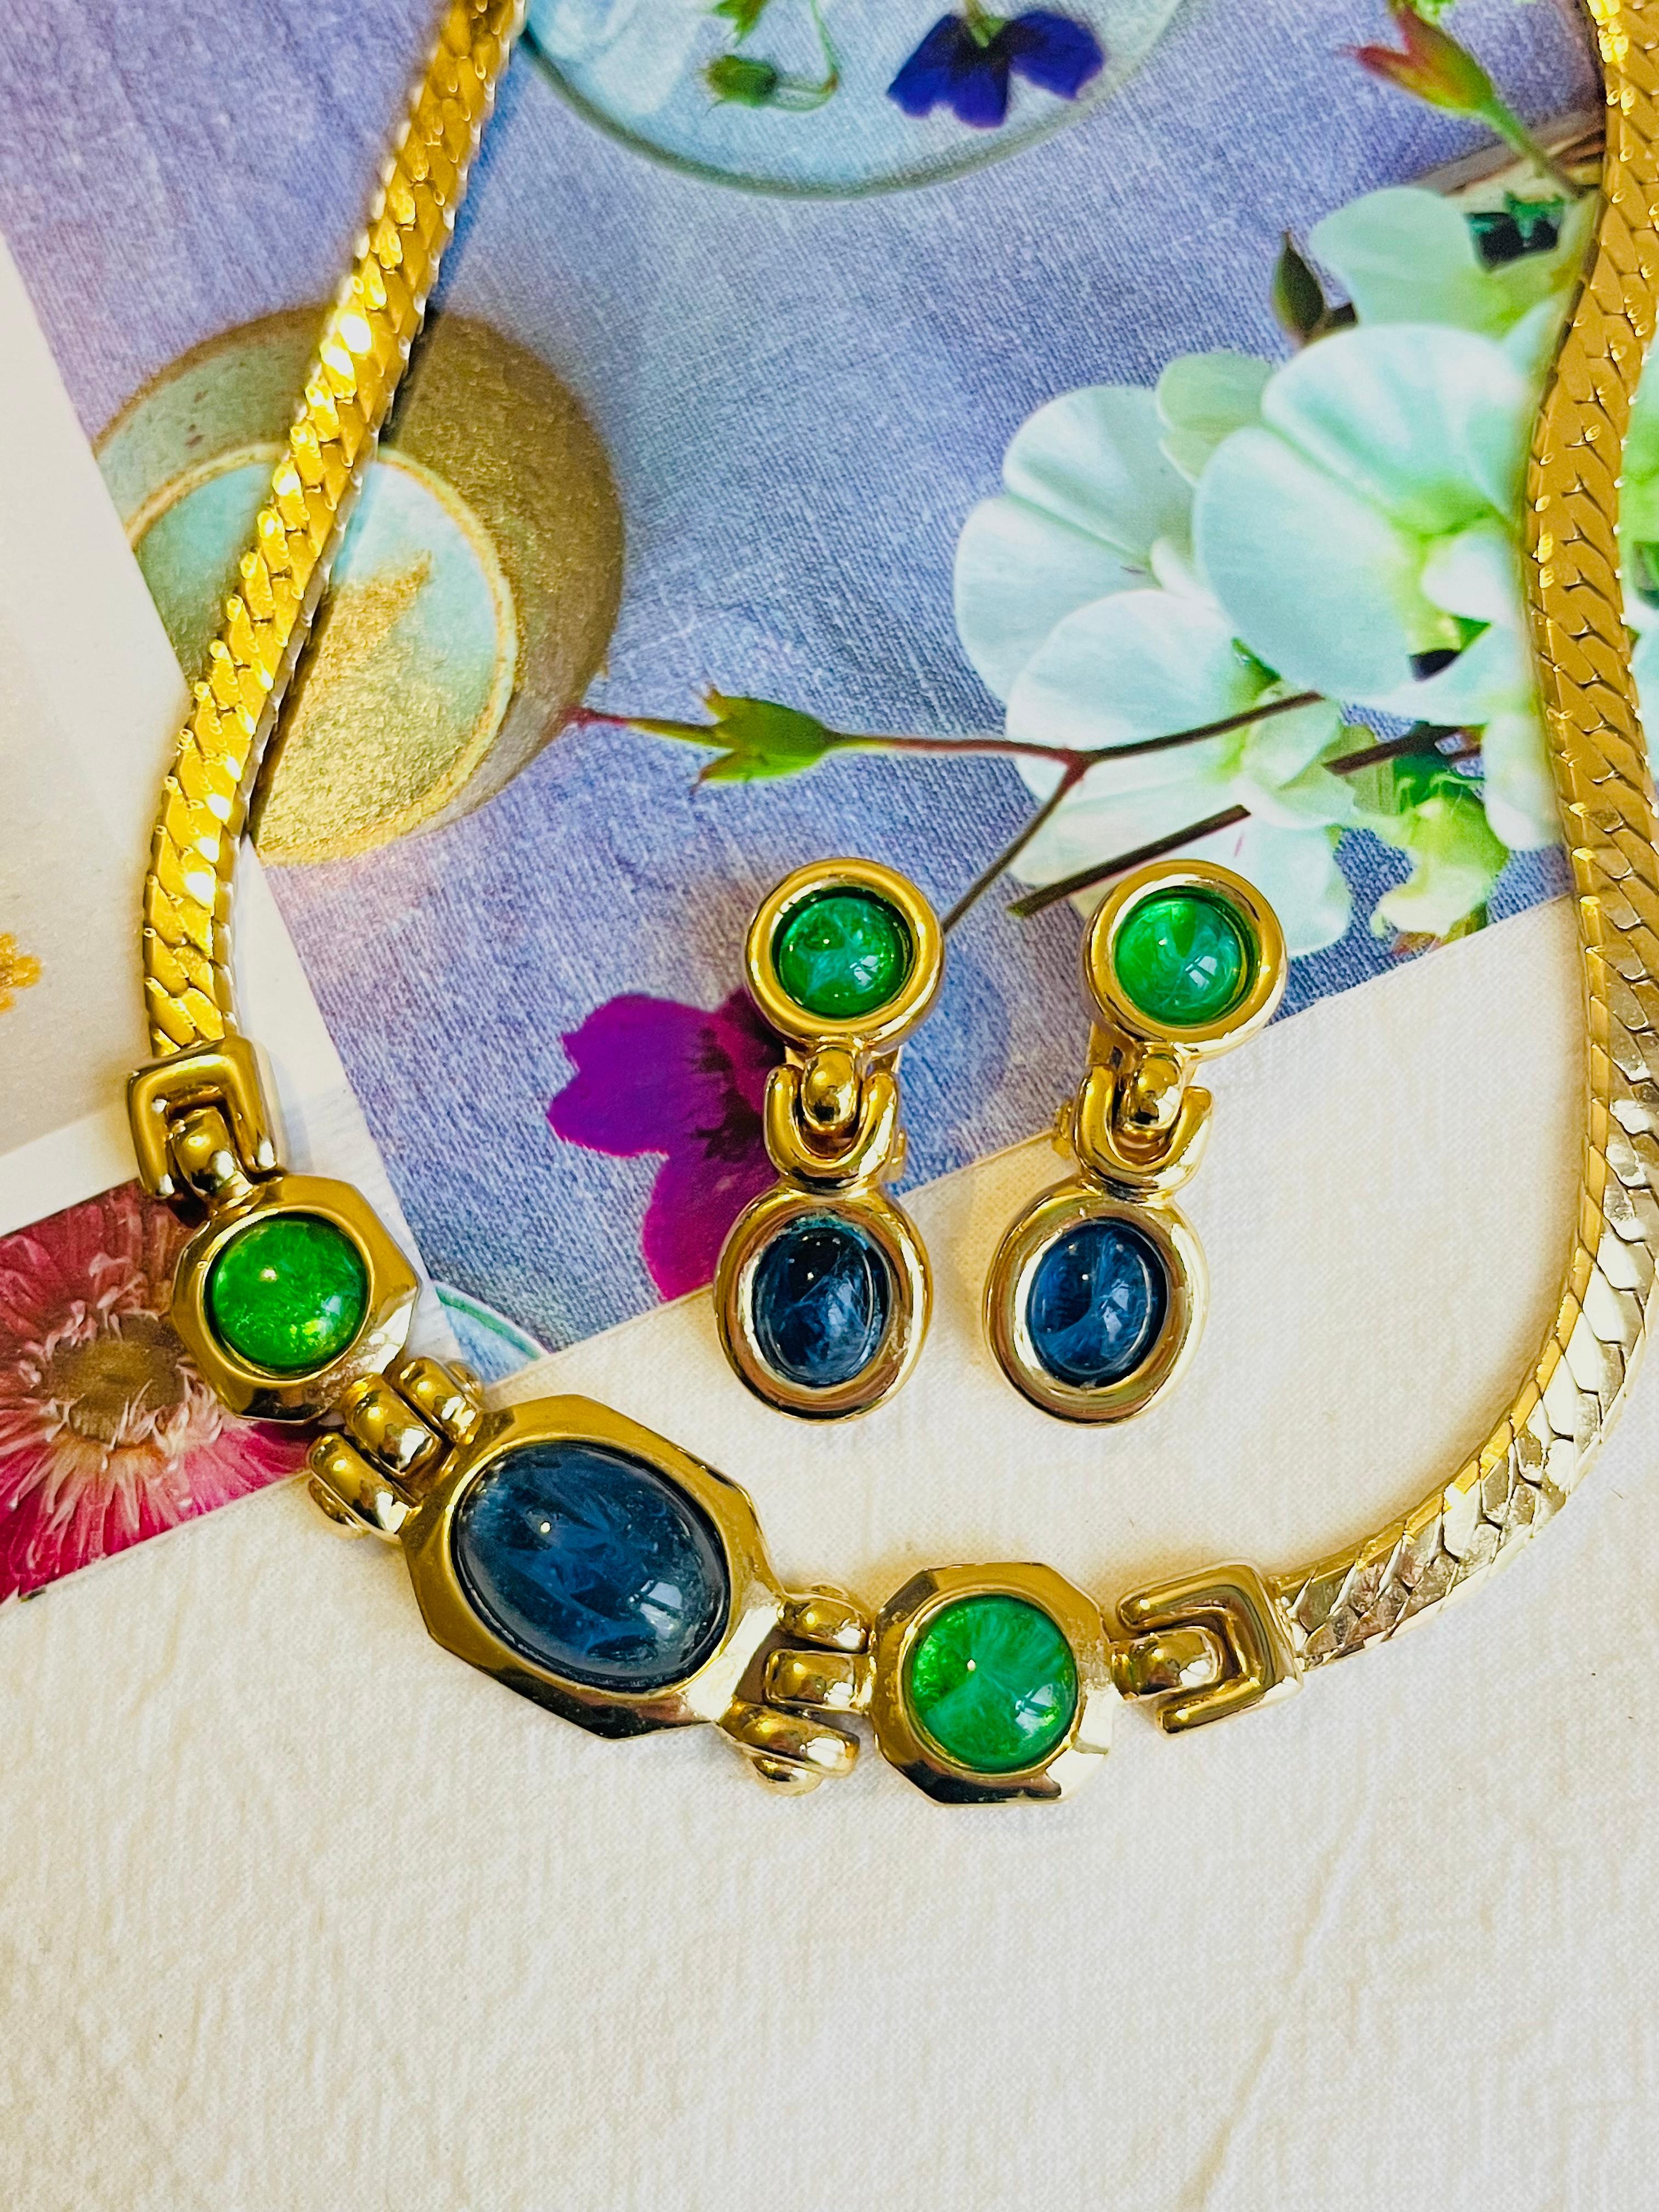 Christian Dior GROSSE Vintage Emerald Sapphire Pendant Drop Gold Jewellery Set In Excellent Condition For Sale In Wokingham, England